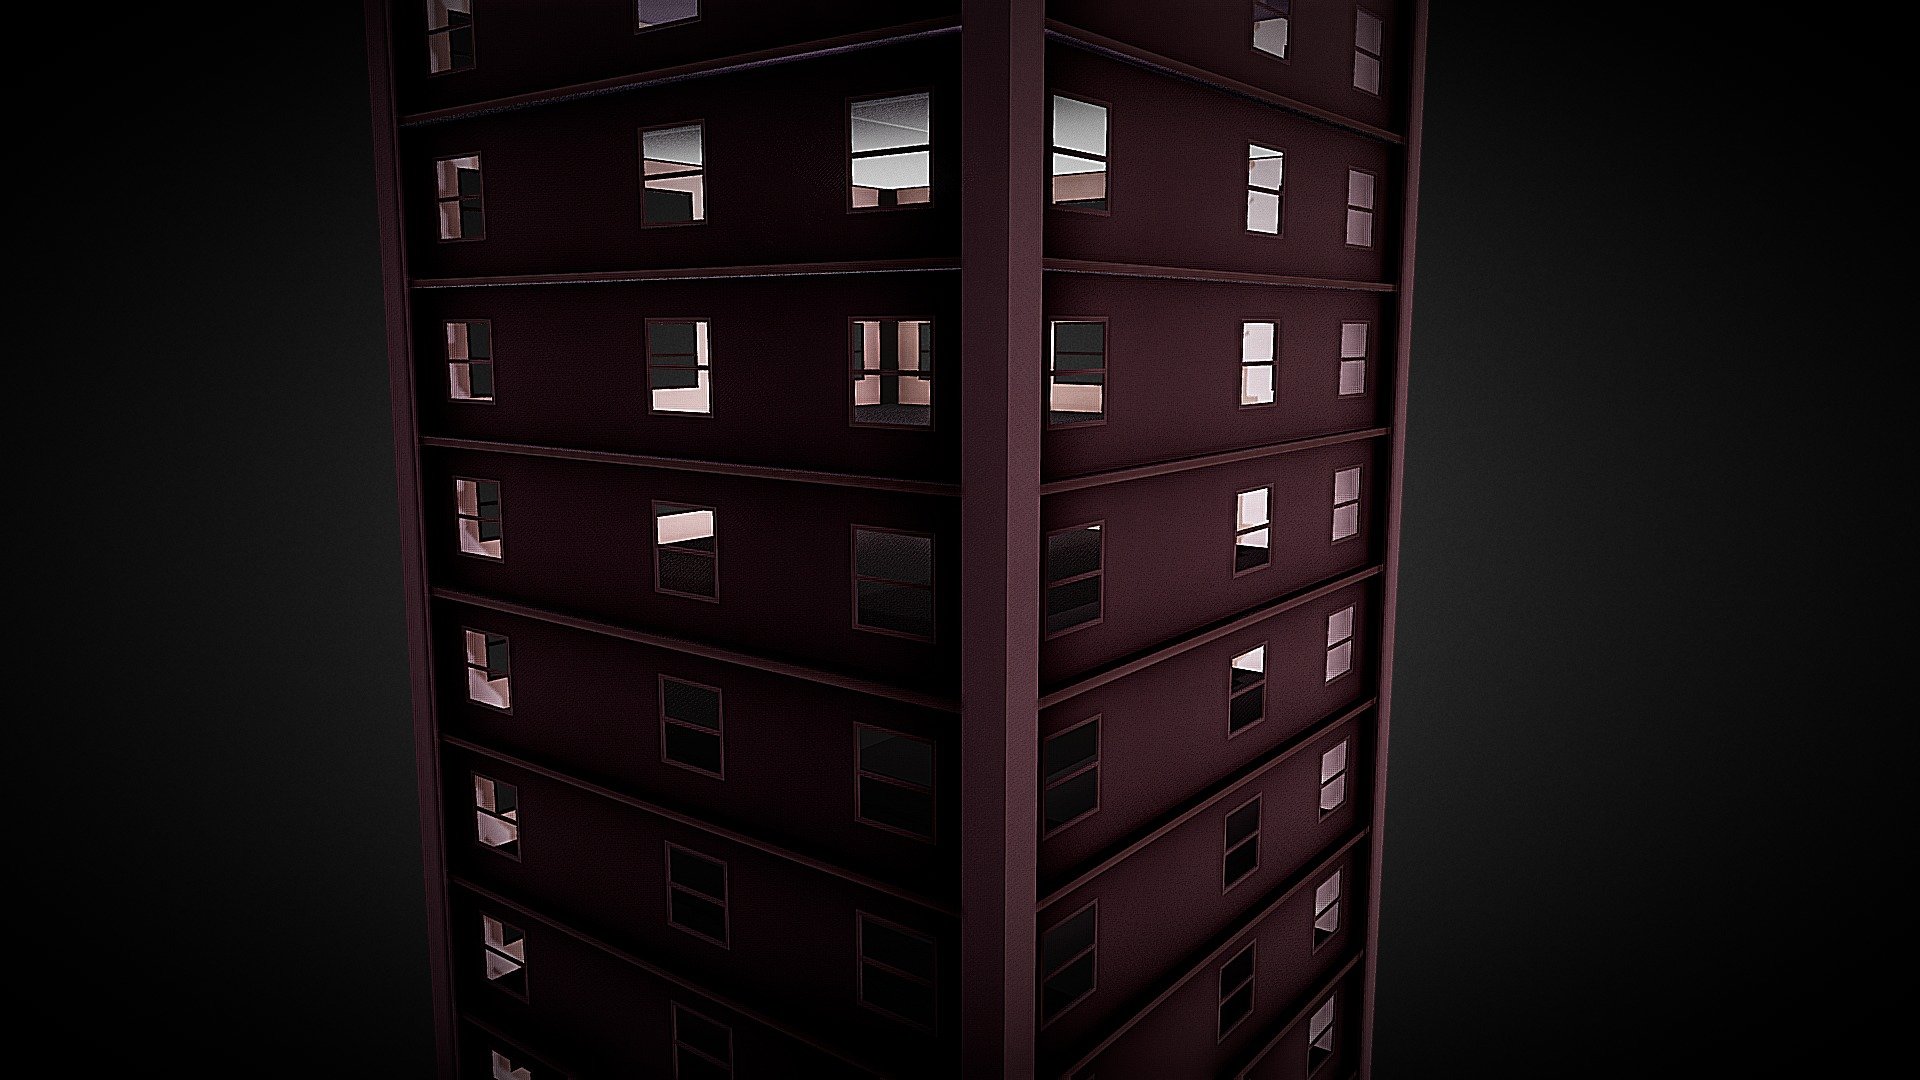 Hello, This model can be modified. You can use it in a Project, Movie,&hellip; But only if you use credits. Thank you. We hope you like this 15 story building. you can look in every room and window. the realistic texture of the window is all modified in Blender. If you want to import this model into Blender, than you need to dowload the GTLF file. Go to blender and click IMPORT. Pick the fbx or the GTLF file. wait a bit and than it should load in. Any problems? Let us know in the comments. Thank you and have a great day. And make sure to leave a like. If you readed all that text, Than comment &lsquo;Confirm' and you might get a suprise. Oww and don't forget to follow us for more models like this. Here is our youtube channel: 
Youtube: https://www.youtube.com/channel/UC0Ax53OxJkOfUiATcDskMHA
Make sure to subscribe 3d model